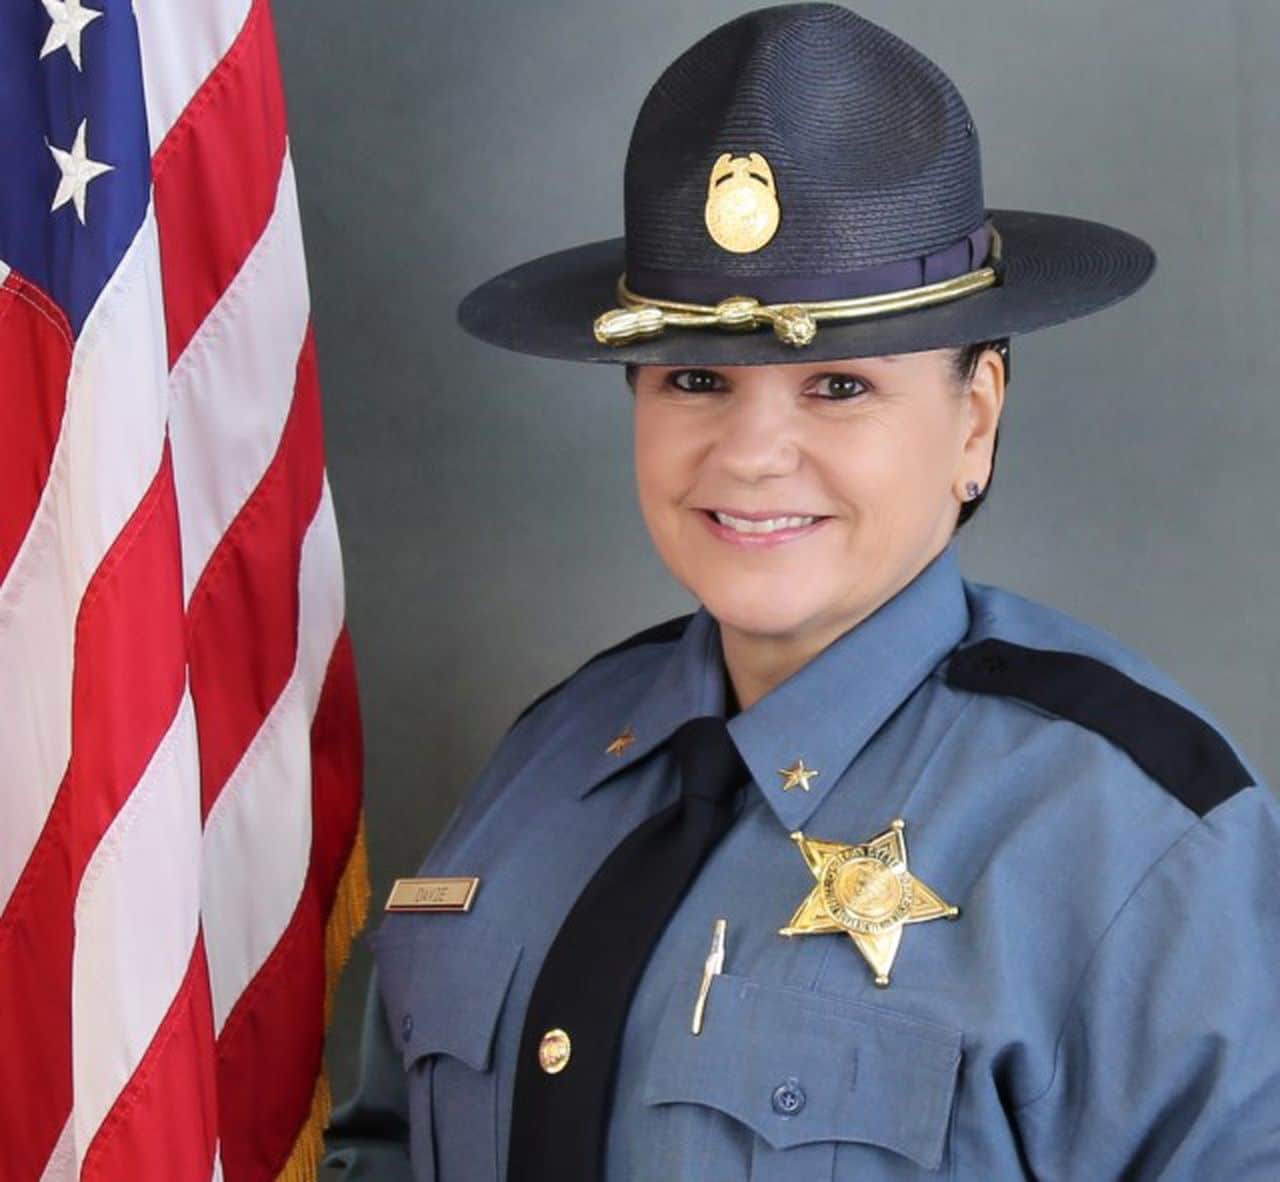 Terri Davie takes over early as Oregon State Police superintendent ...